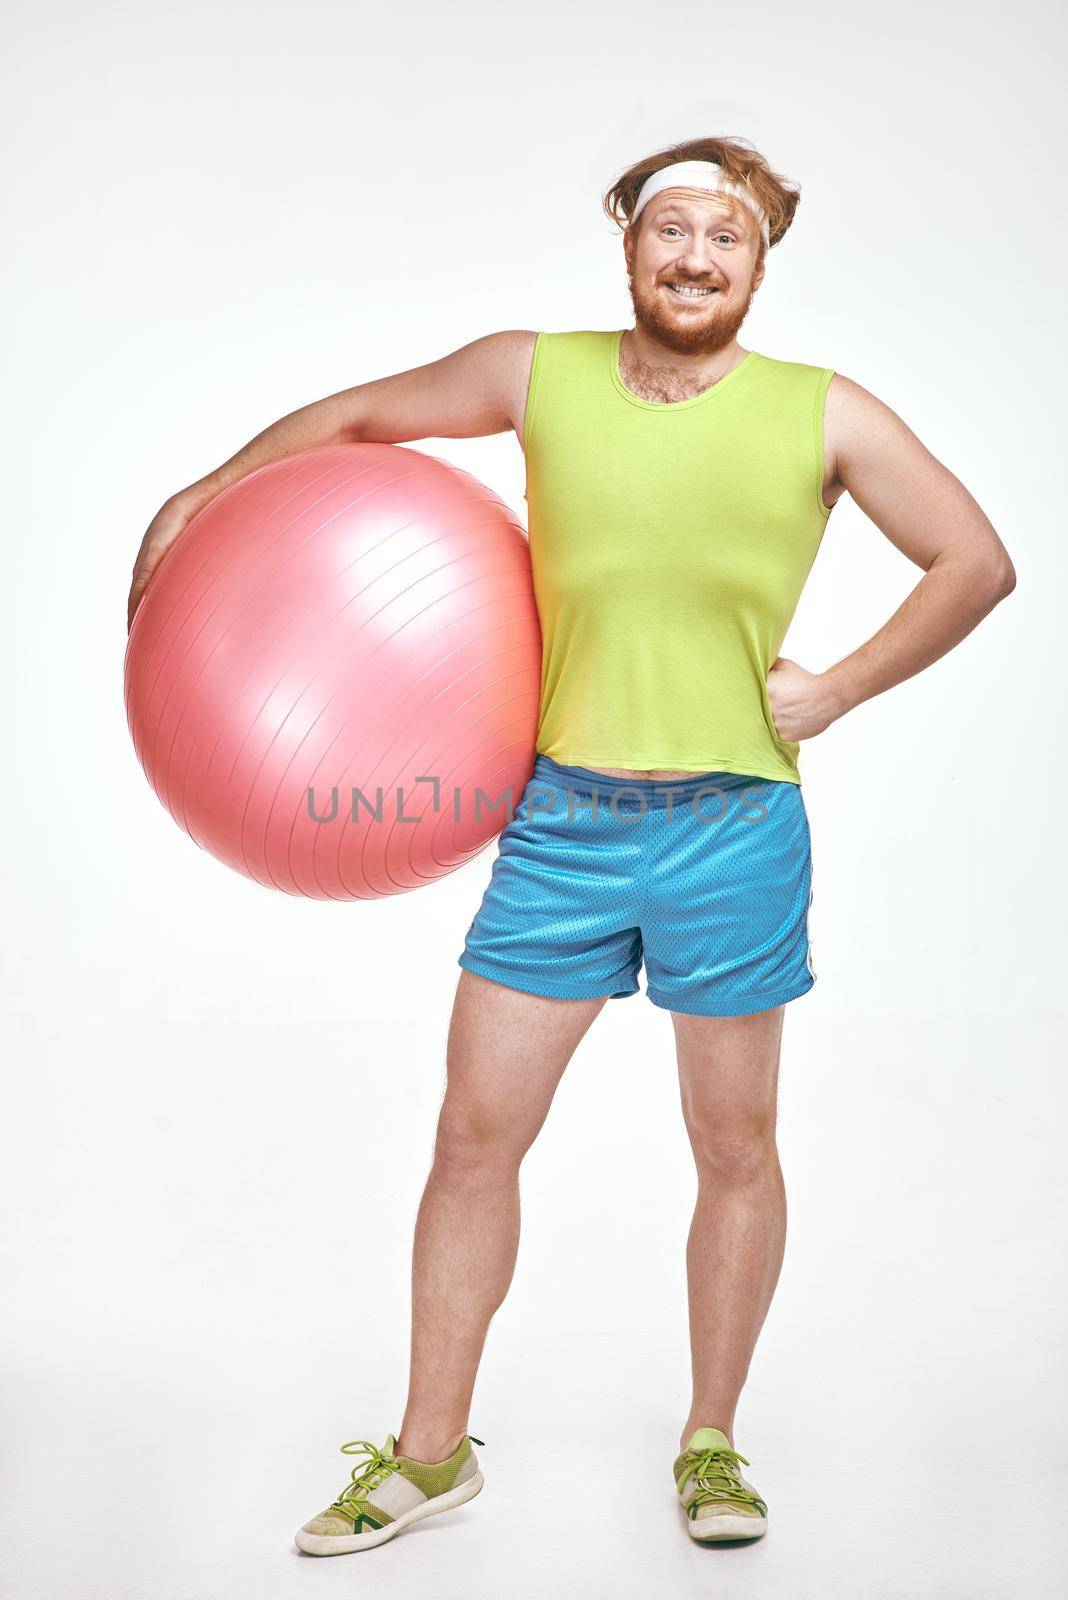 Red haired, bearded, plump man is holding fitness ball by friendsstock